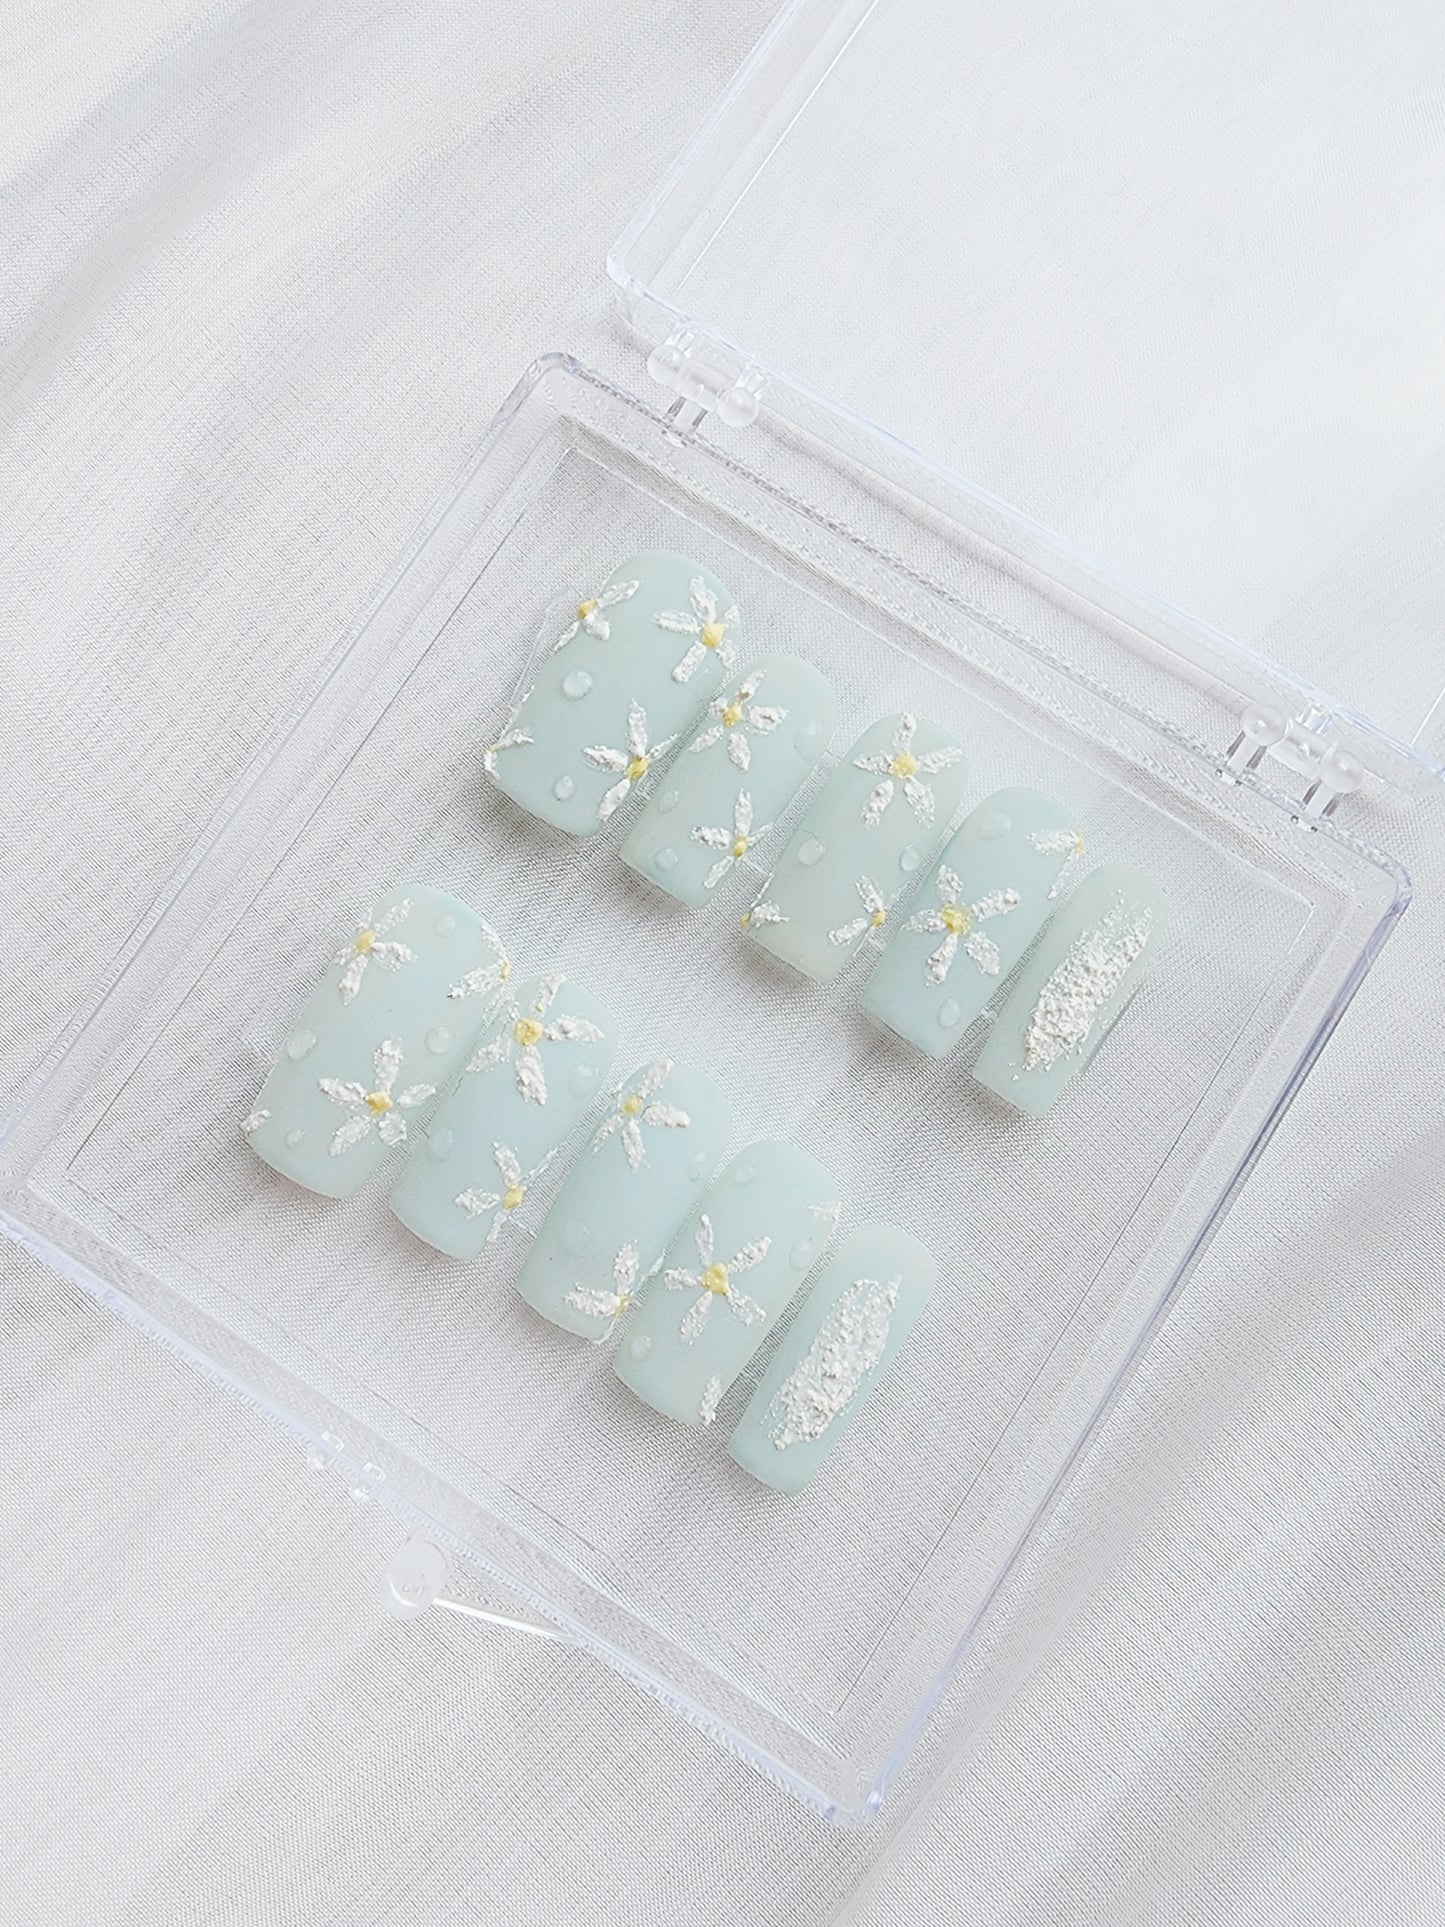 [N02] Daisy Press On Manicure Nails